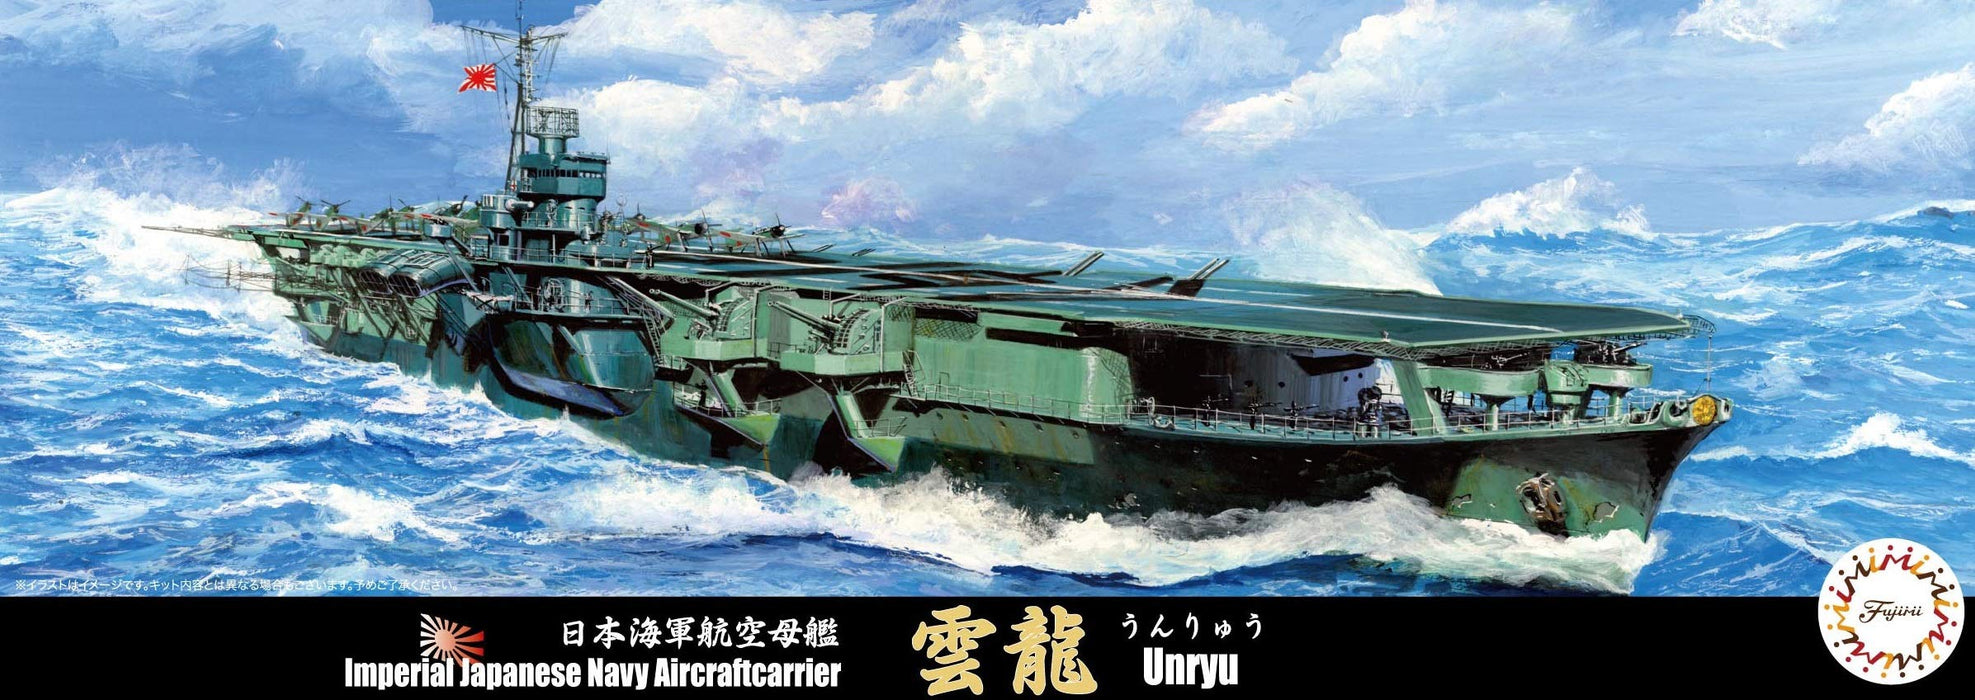 Fujimi 1/700 Japanese Navy Carrier Unryu Model Kit Special Series No.42 Toku-42_6